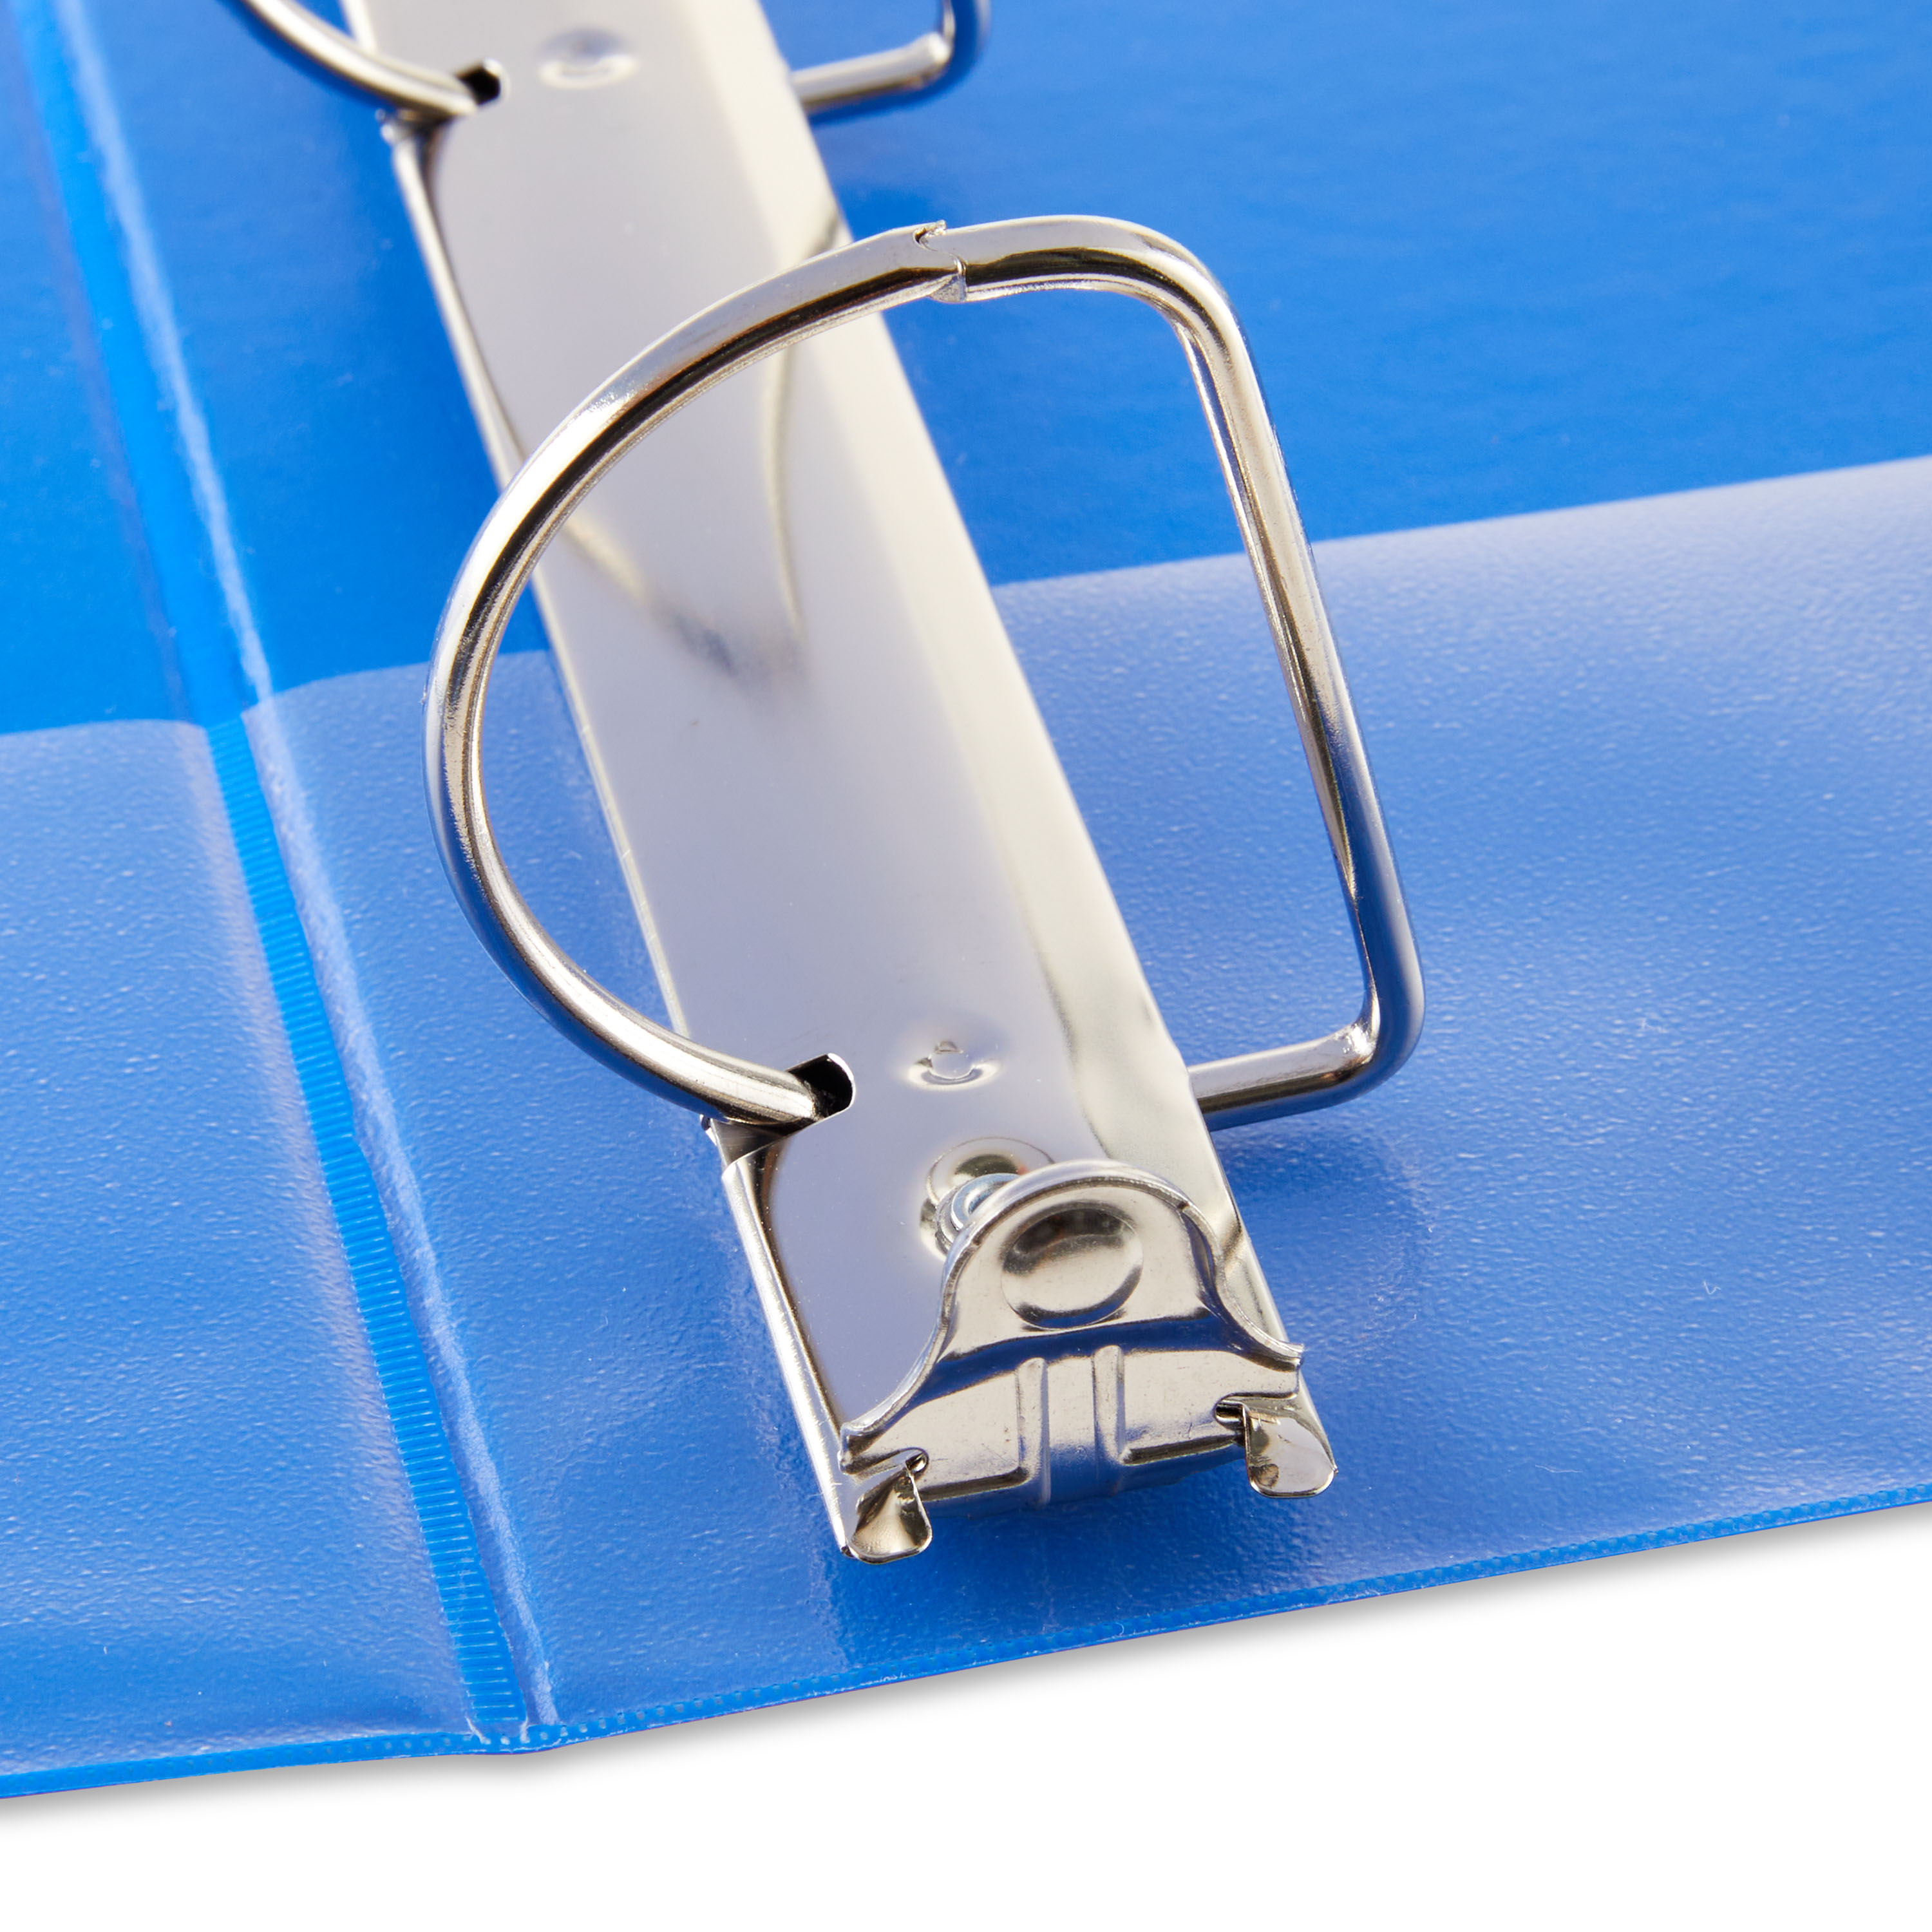 Pen+Gear Durable View 2" D-Ring Binder, Blue - image 3 of 10